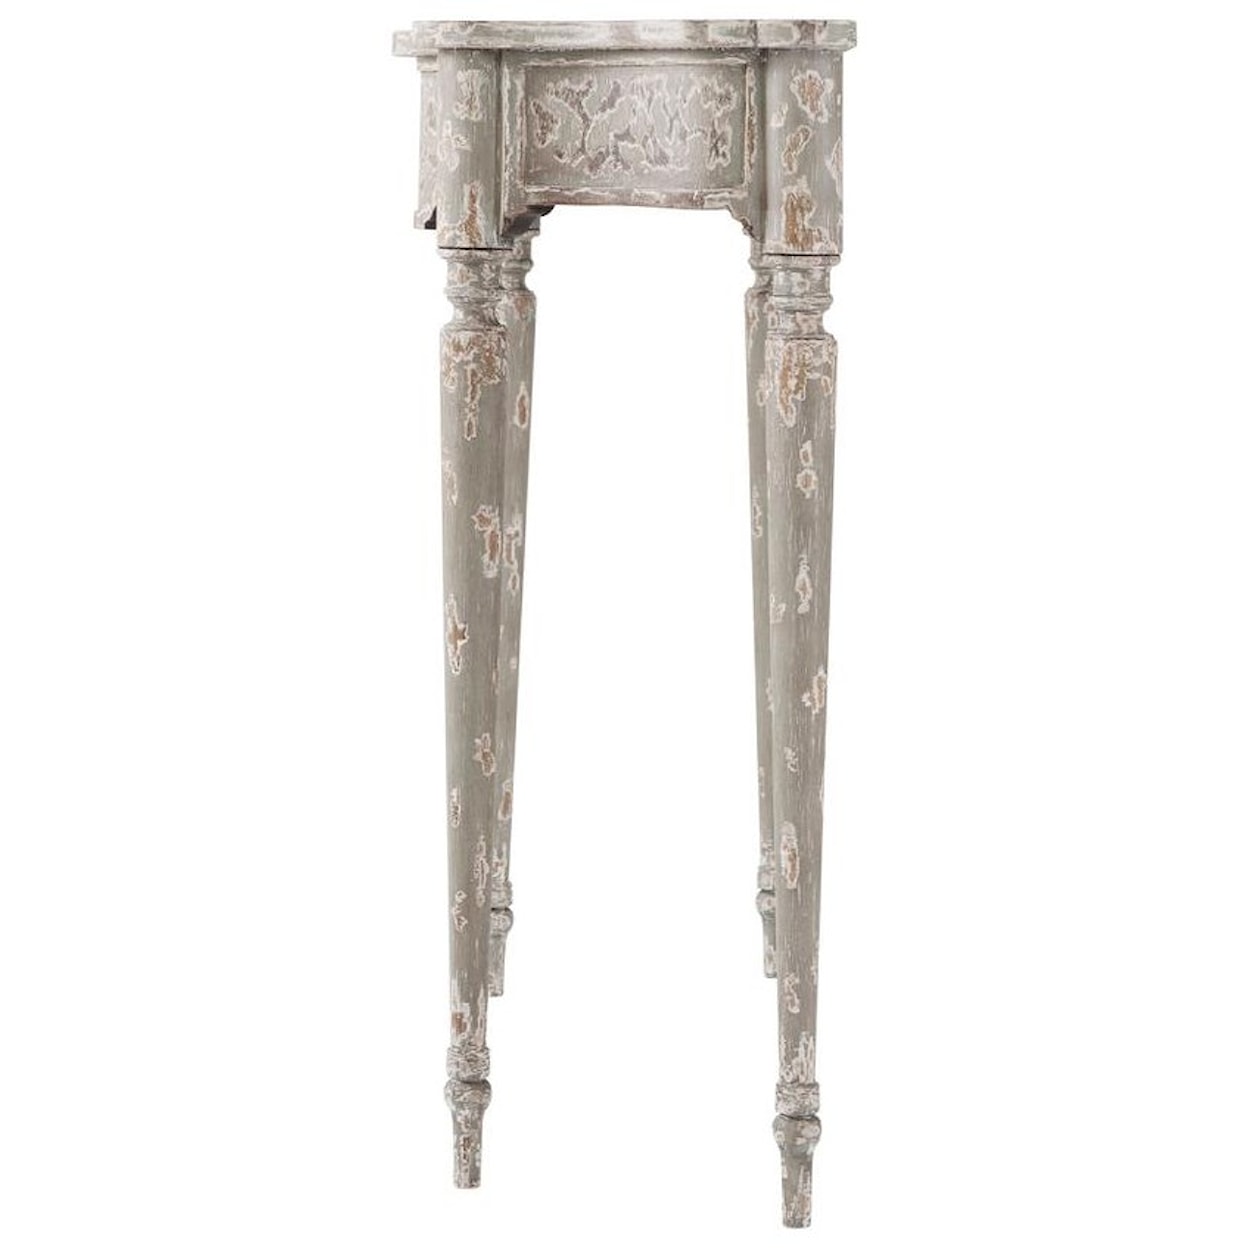 Theodore Alexander Delroy The Delroy Console Table